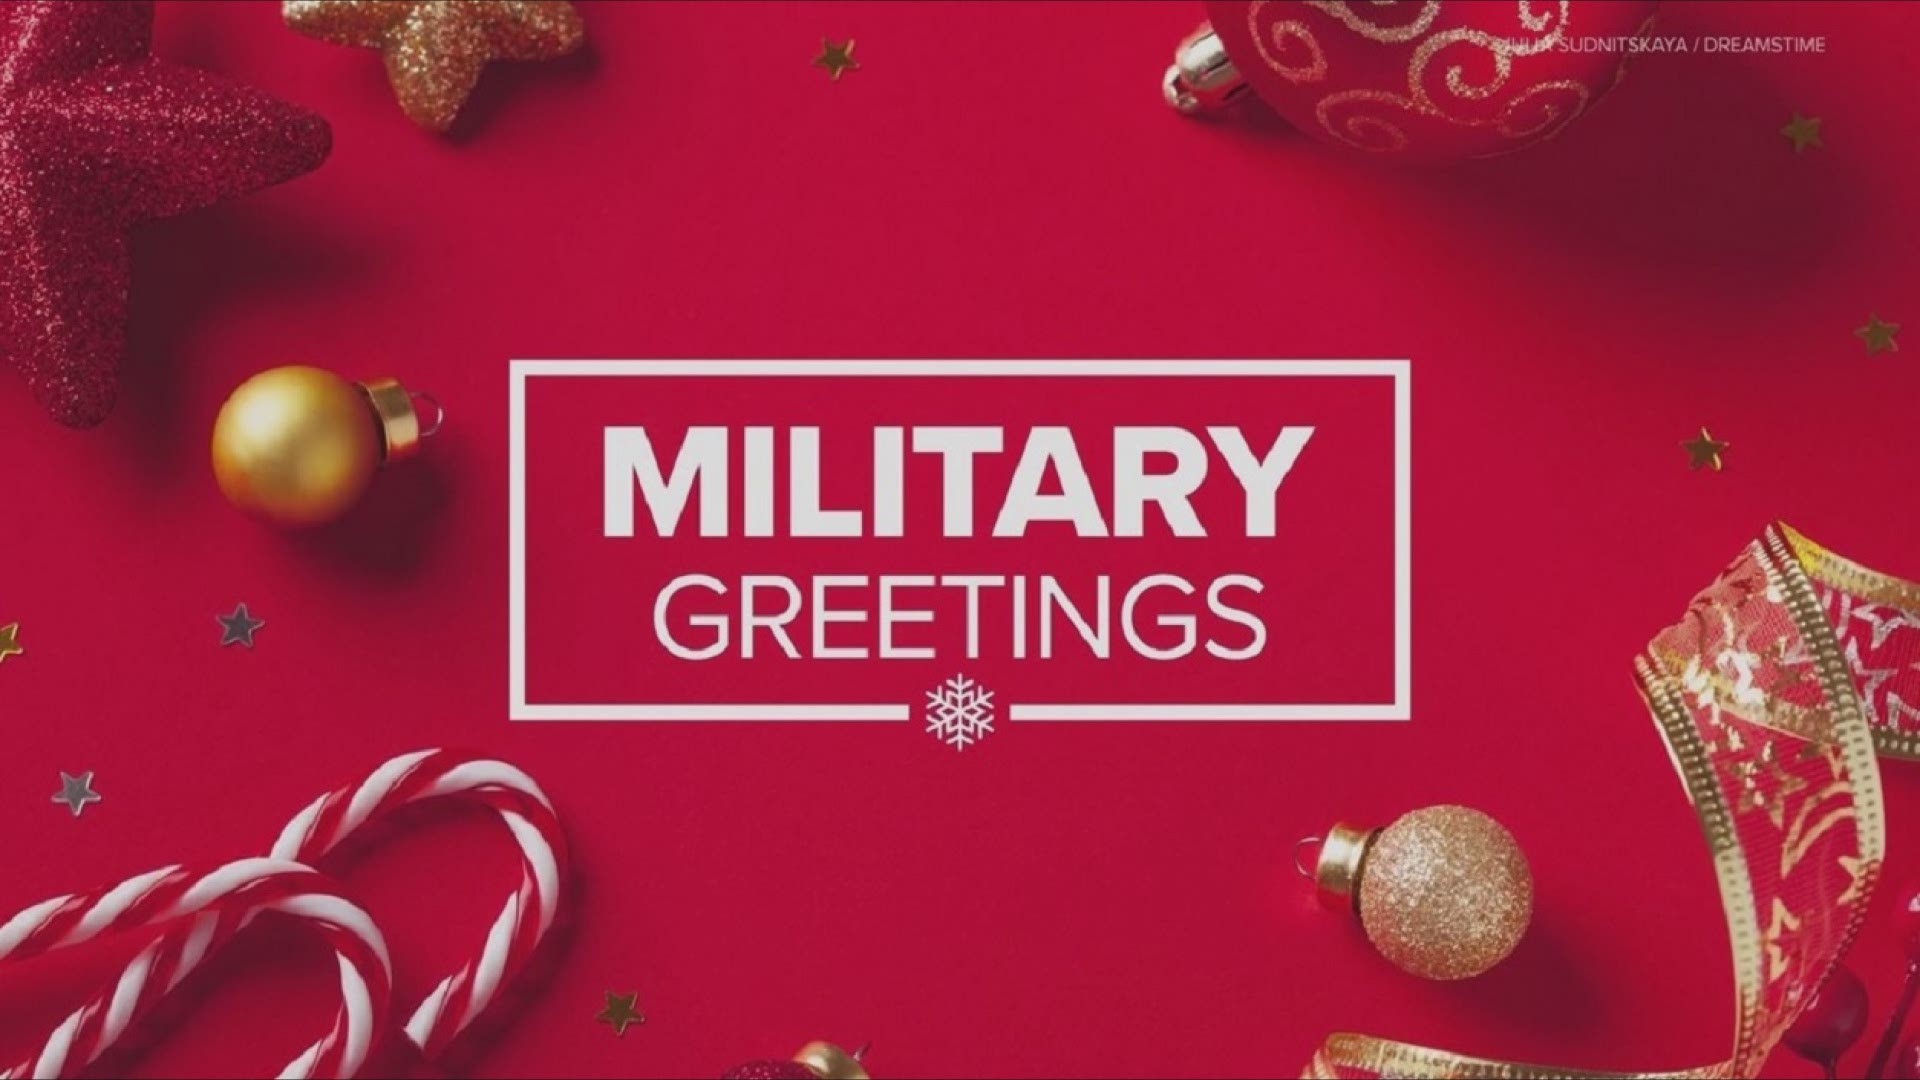 It's Christmastime and military members away from home send holiday greetings to family and friends in Kentucky, Southern Indiana.